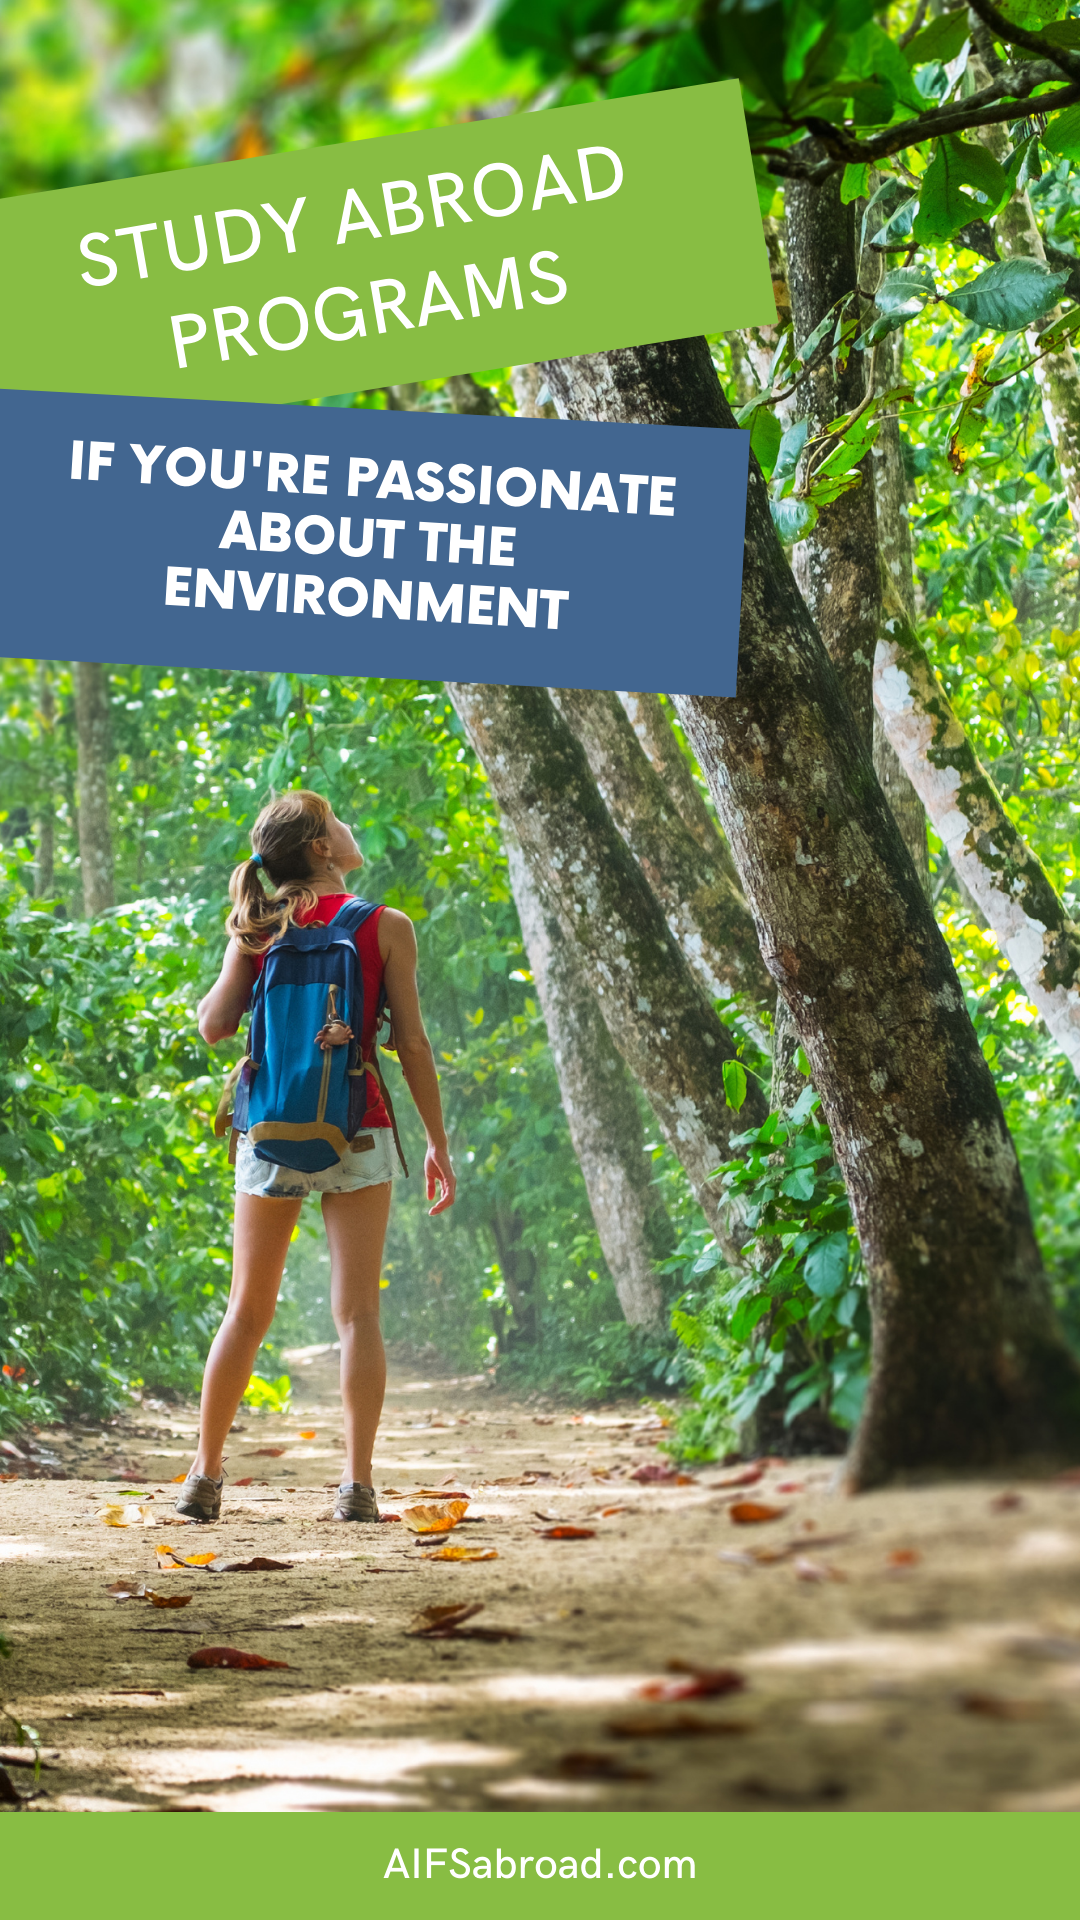 Study abroad programs if you're passionate about the environment